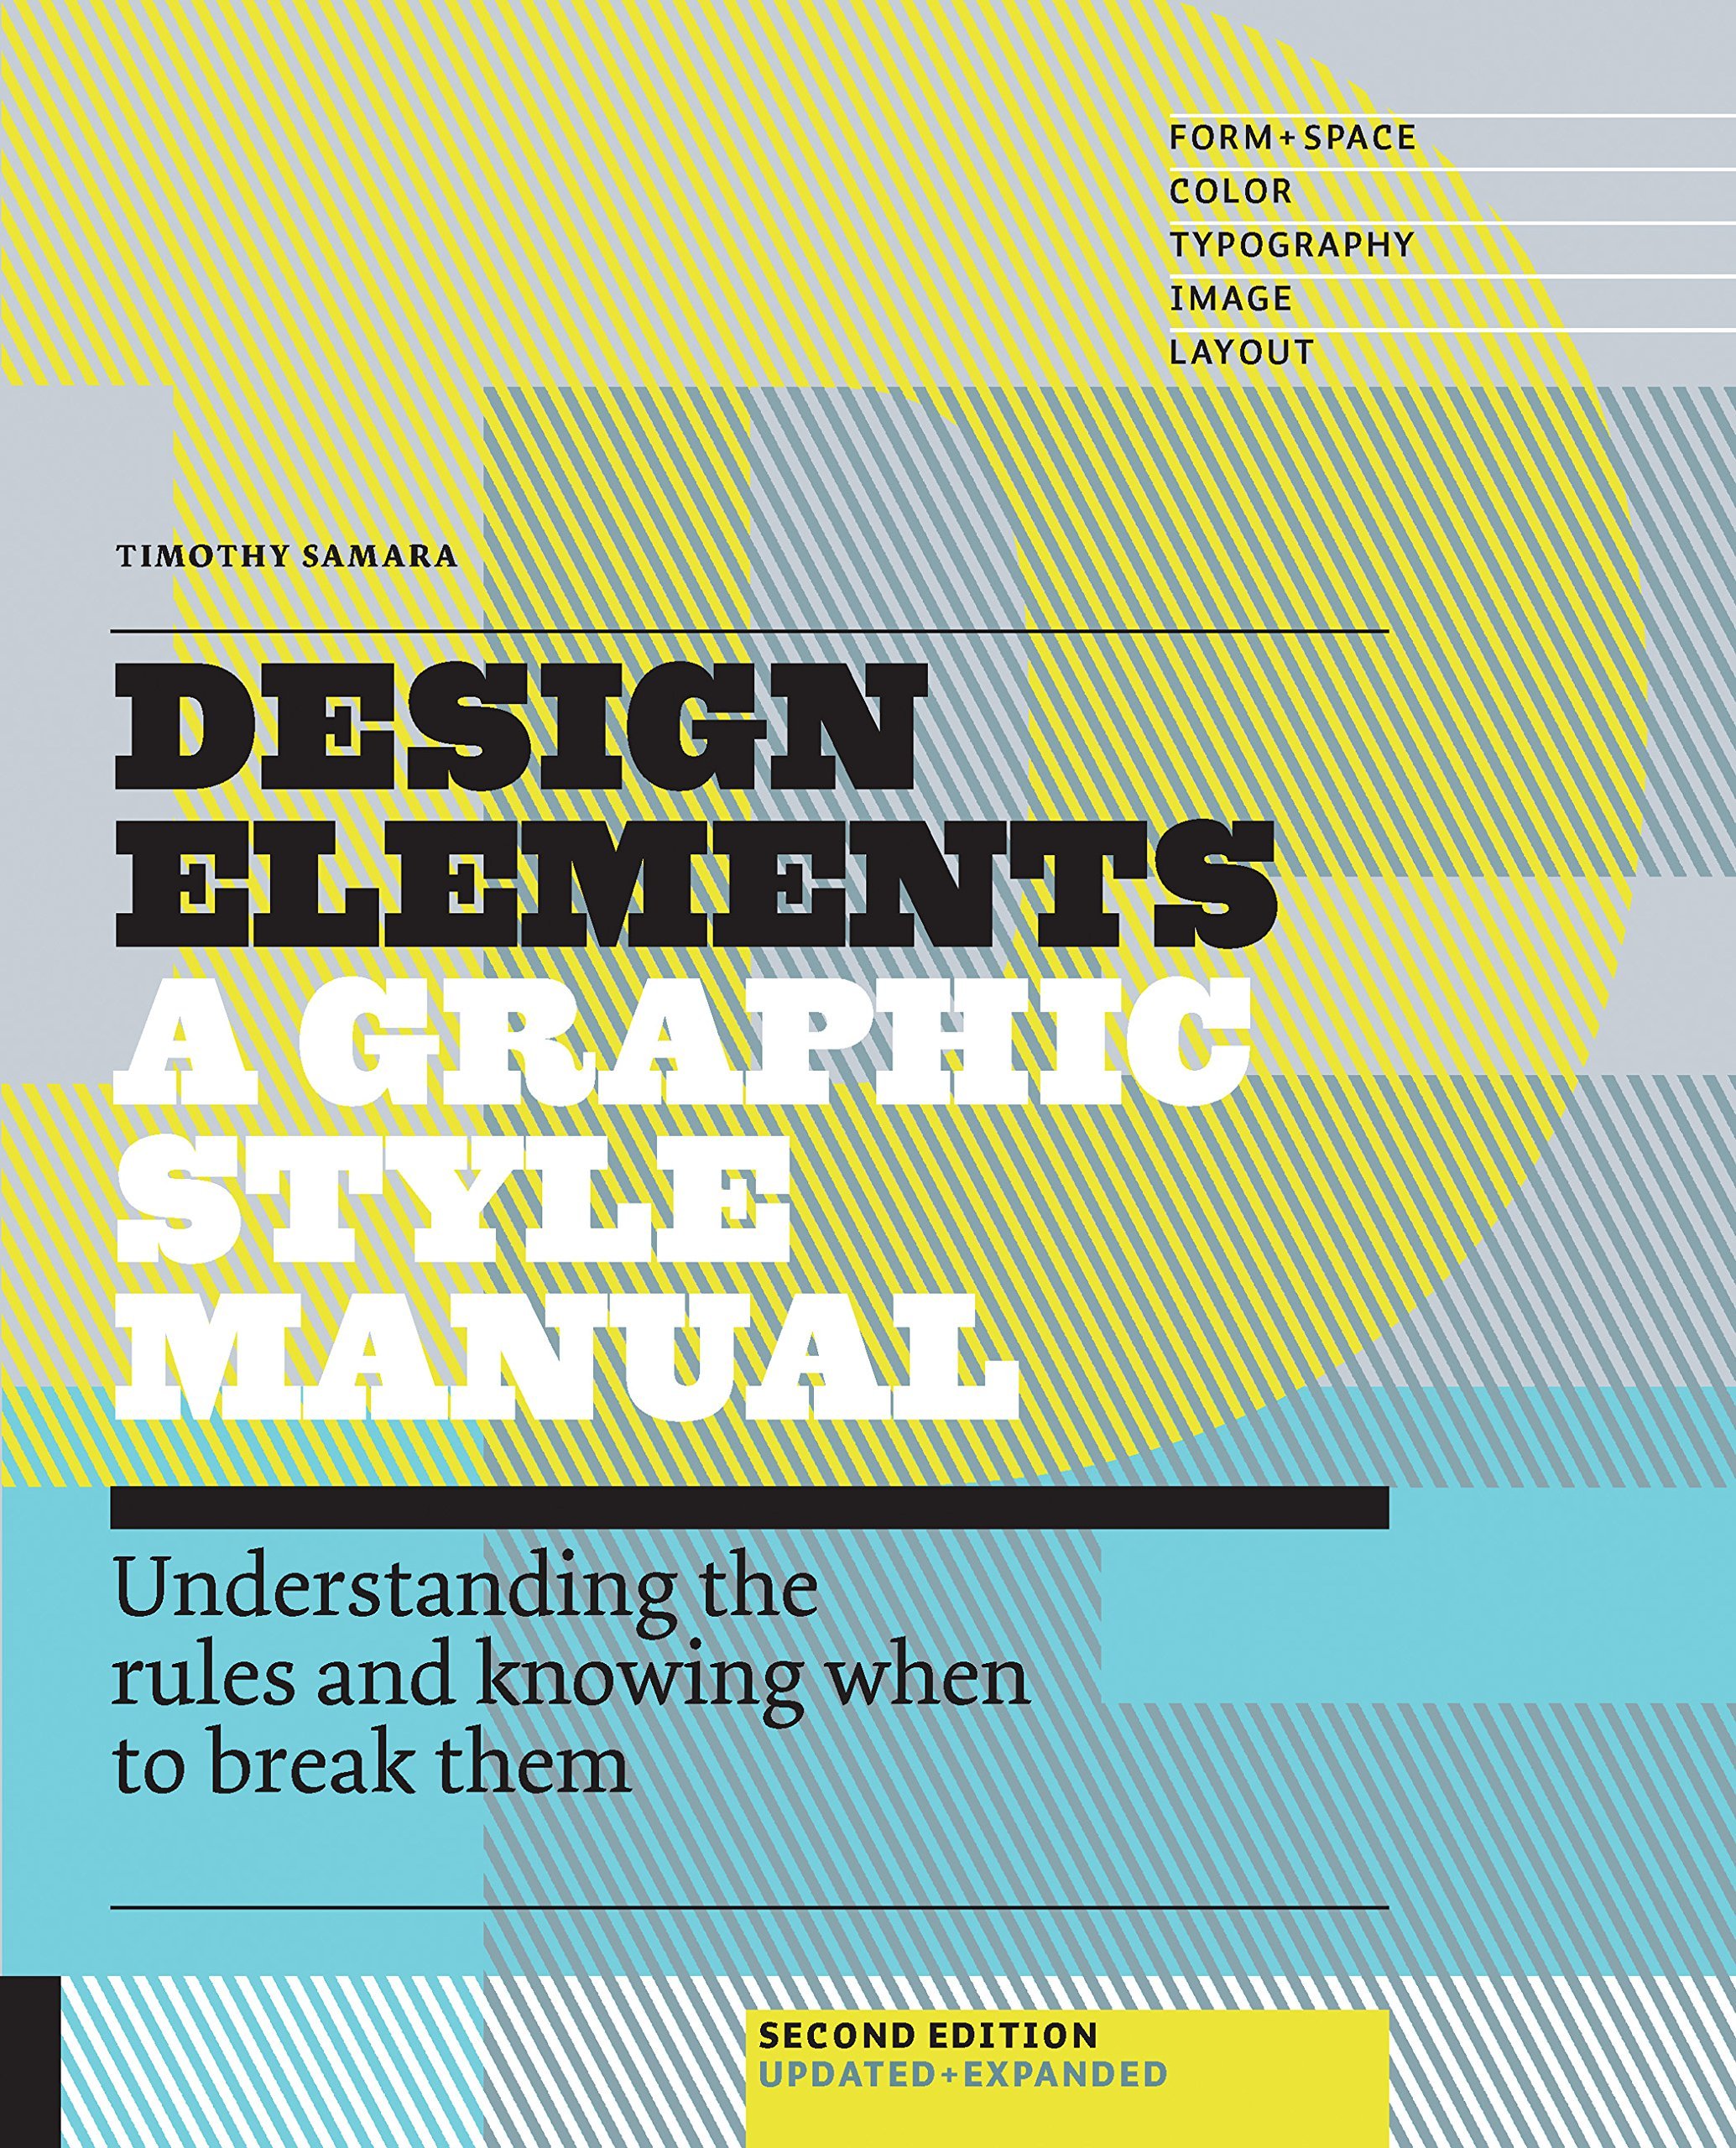 Design Elements, 2nd Edition: Understanding the rules and knowing when to break them - Updated and Expanded